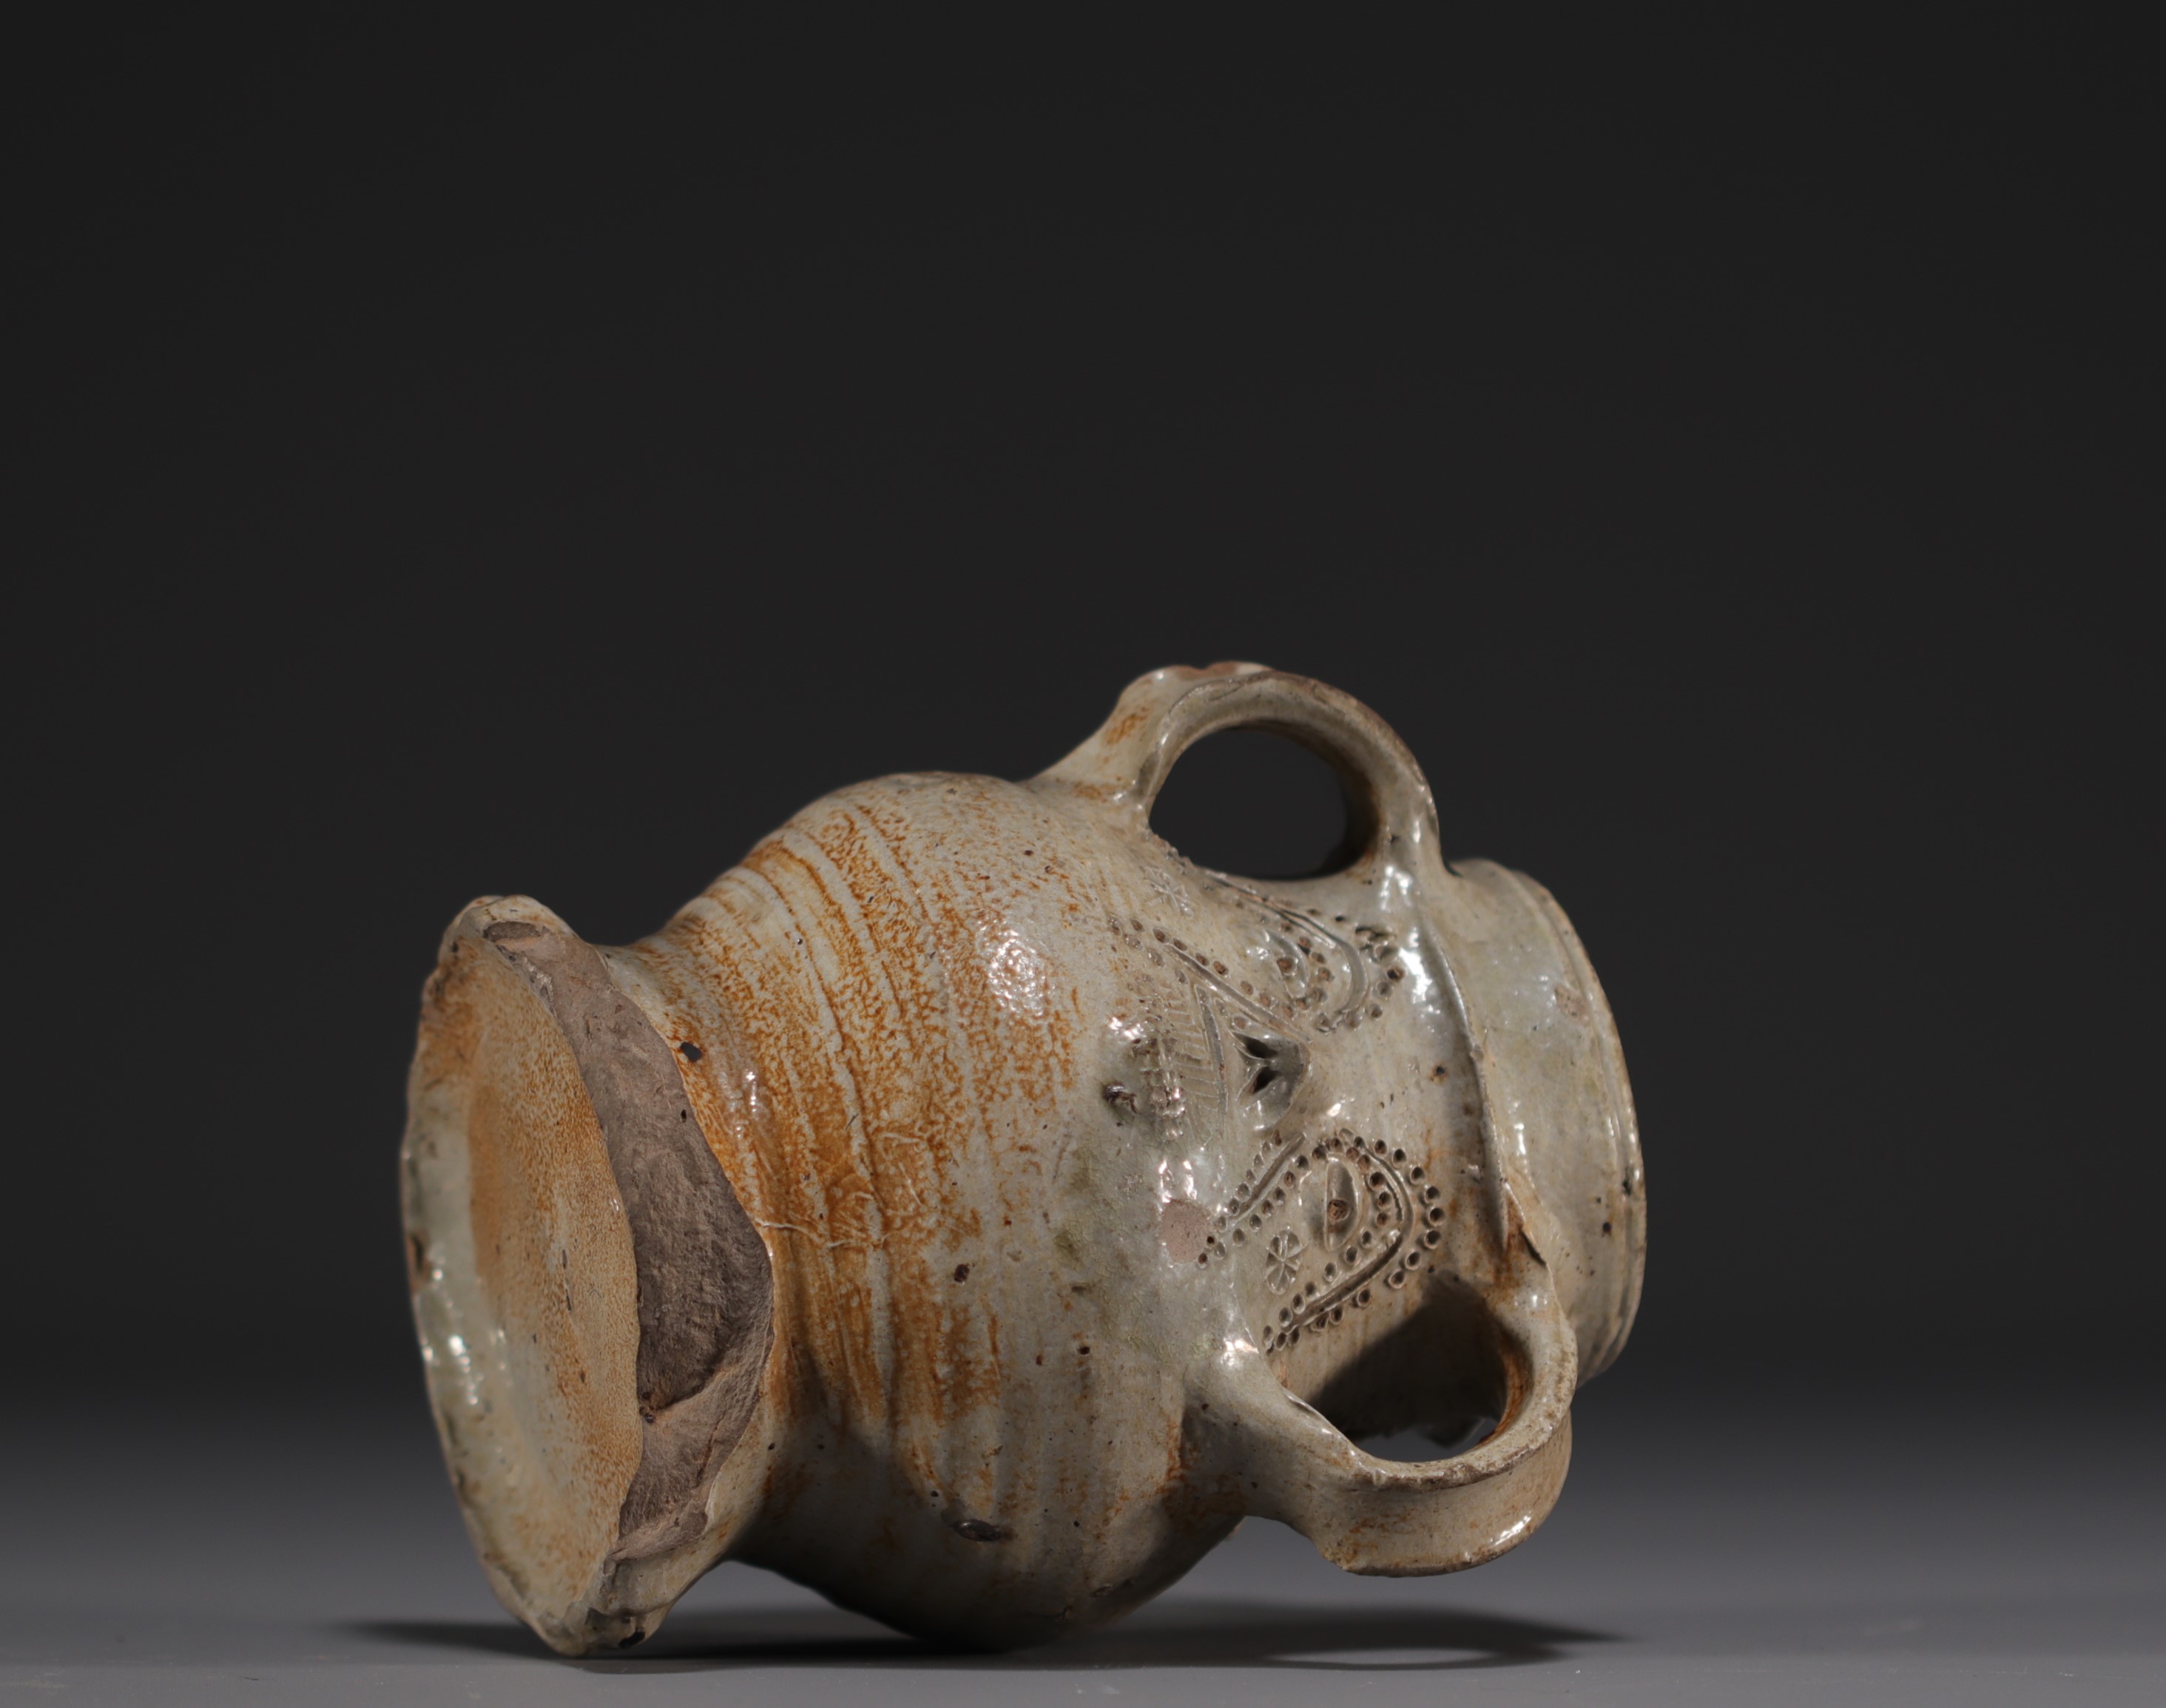 Raeren - Rare stoneware jug decorated with faces, salt glaze, early 16th century. - Image 4 of 5